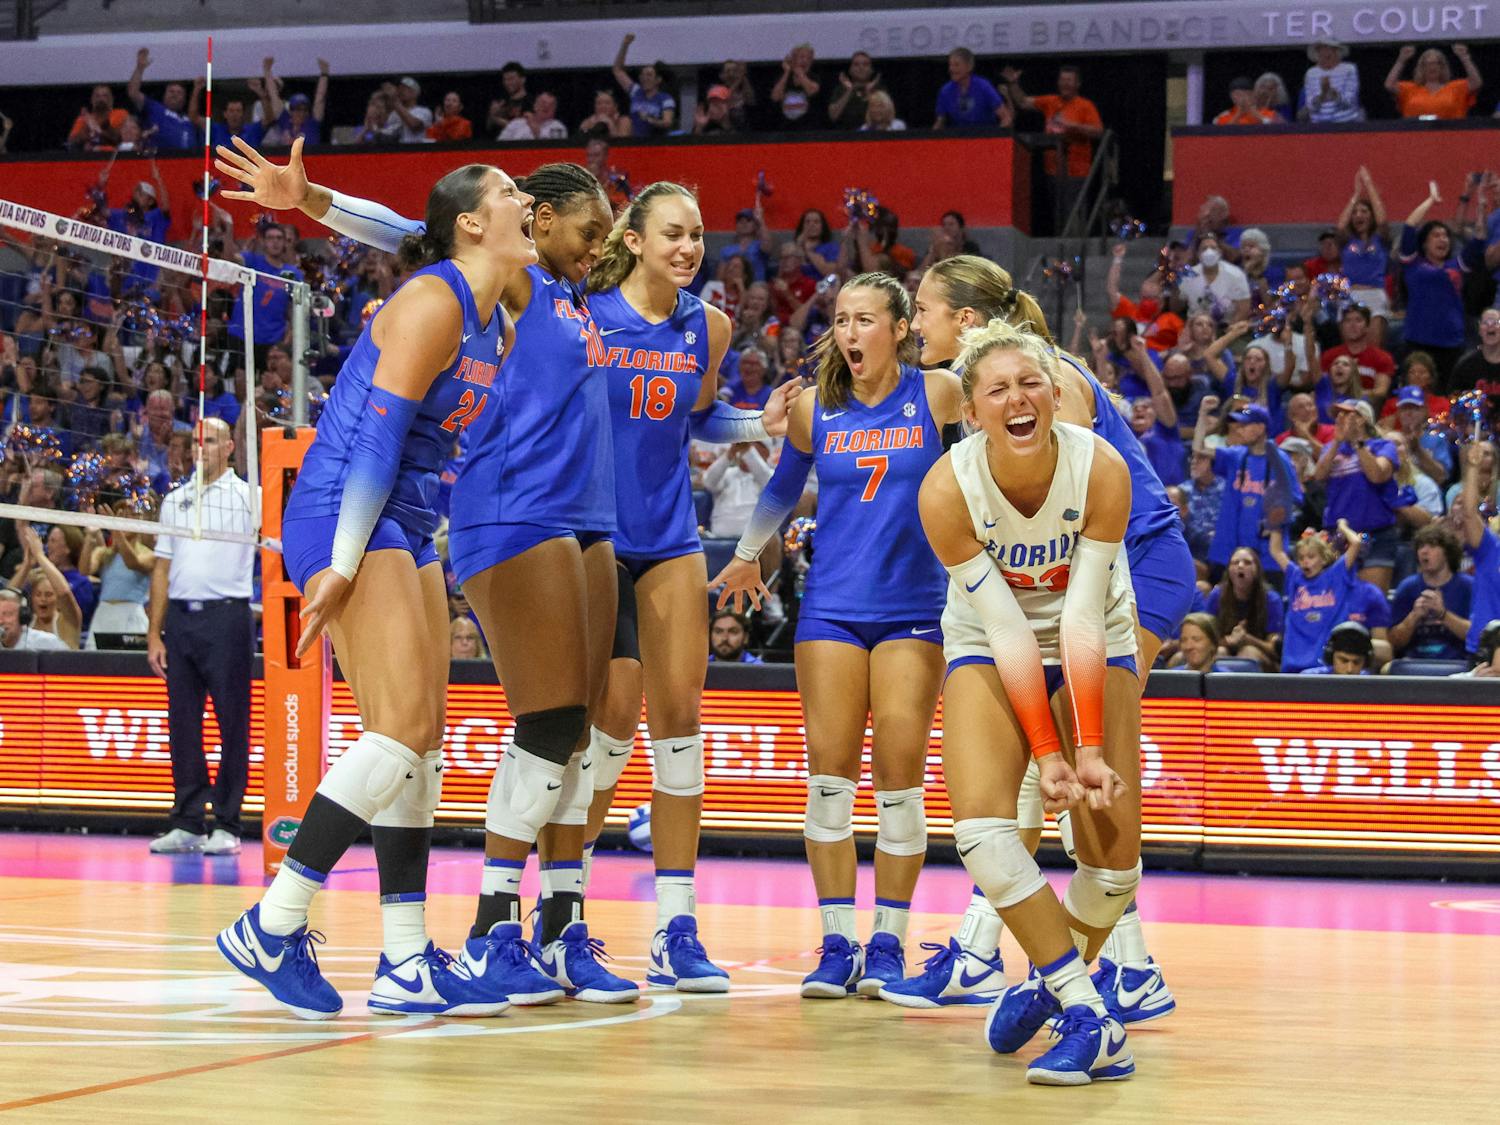 The Florida volleyball team celebrates a point during their match against the #1 ranked Wisconsin Badgers on Sunday, Sept. 17, 2023.